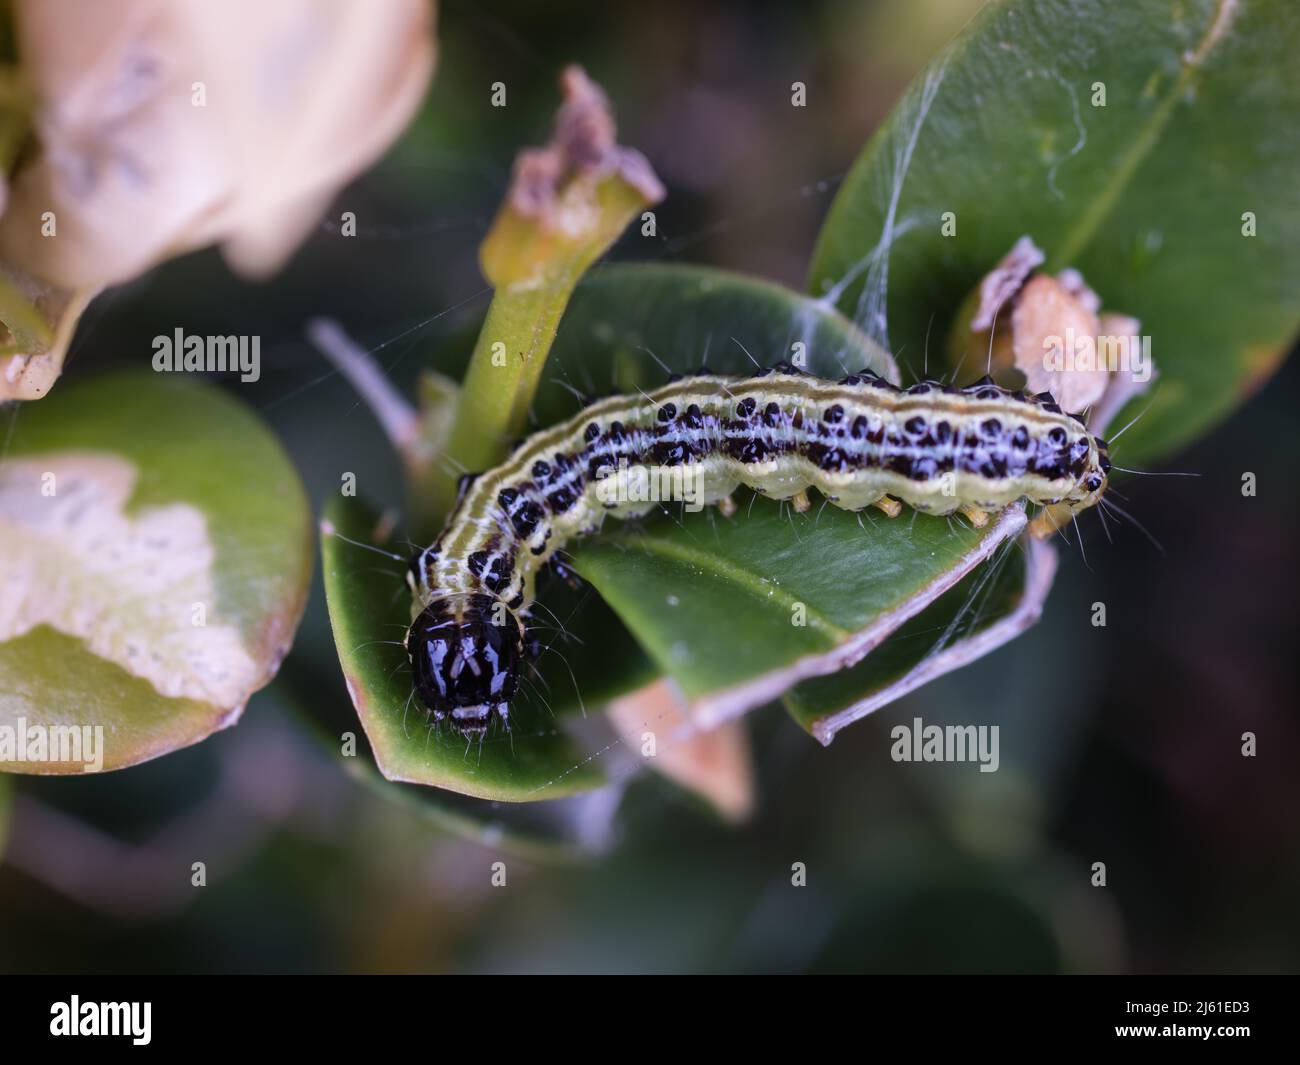 caterpillar greenish yellow in colour with black head and light & dark strips with spots along their length feeding on box wood Stock Photo